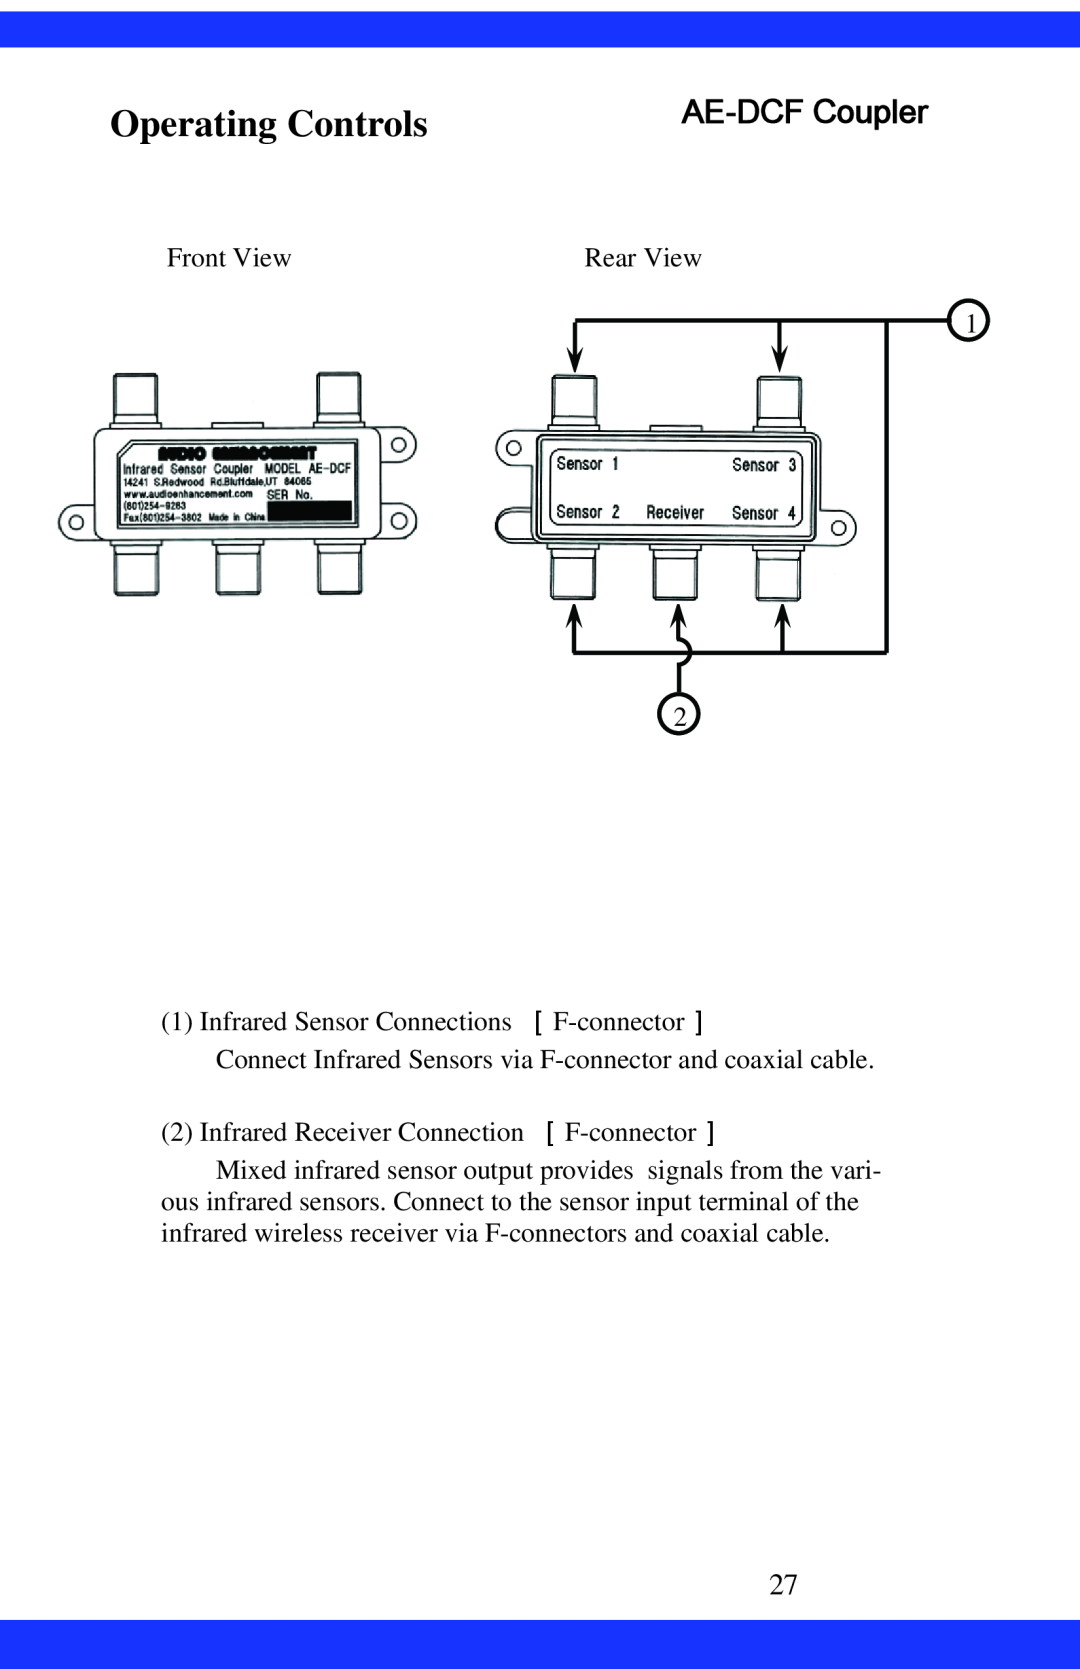 Dukane CAE-20W Operating Controls, AE-DCFCoupler, Front View, Rear View, Infrared Sensor Connections ［F-connector］ 